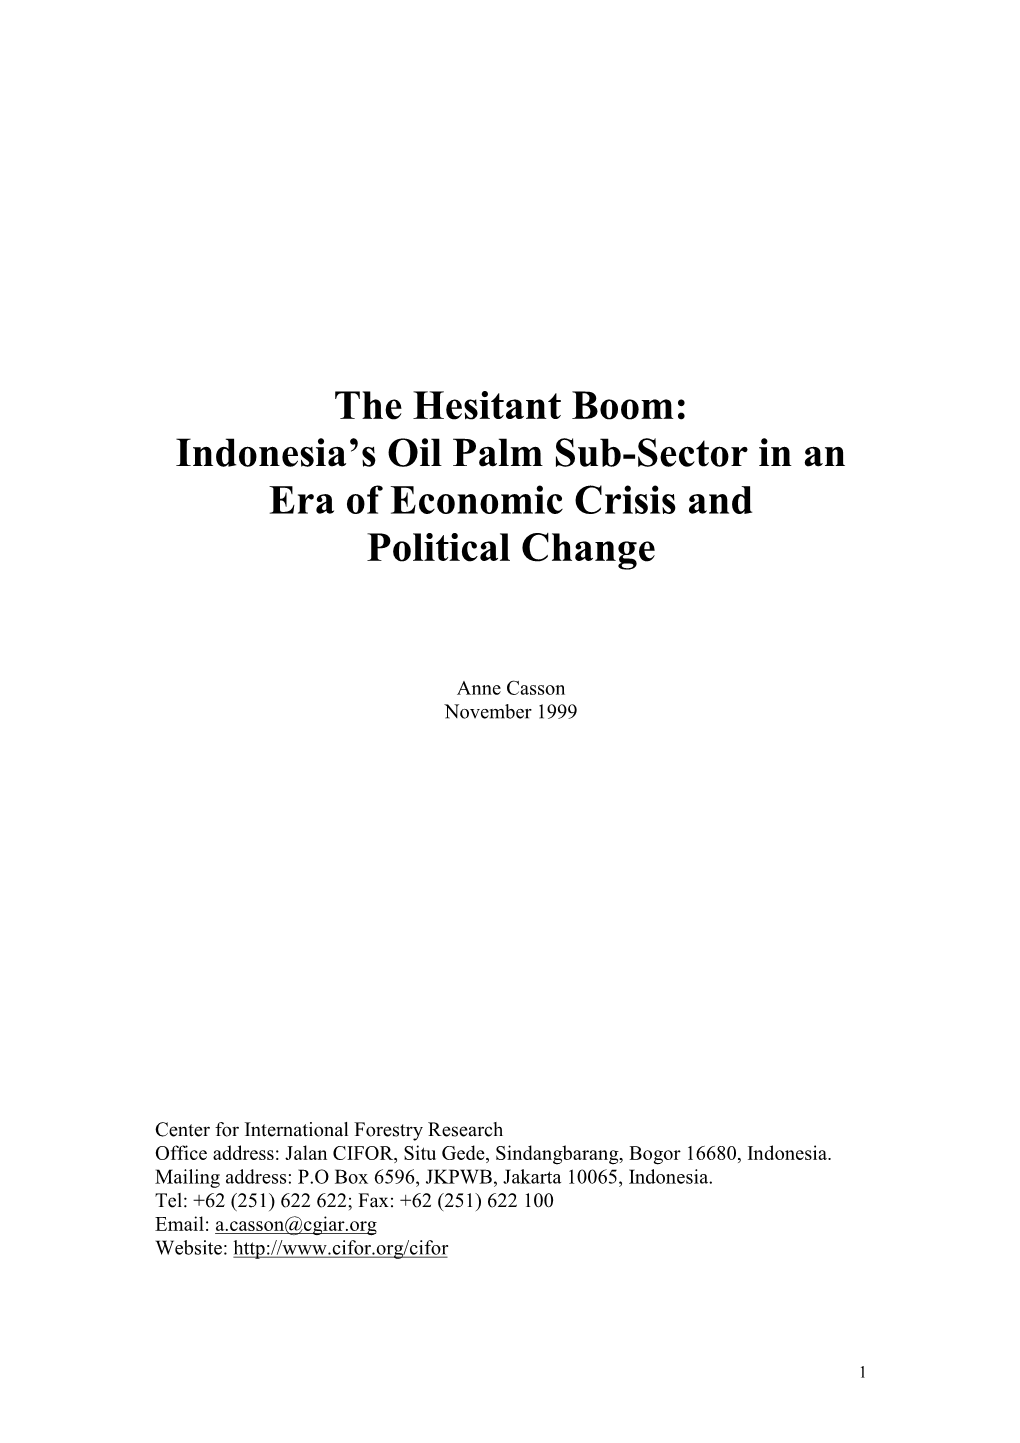 Indonesia's Oil Palm Sub-Sector in an Era of Economic Crisis And